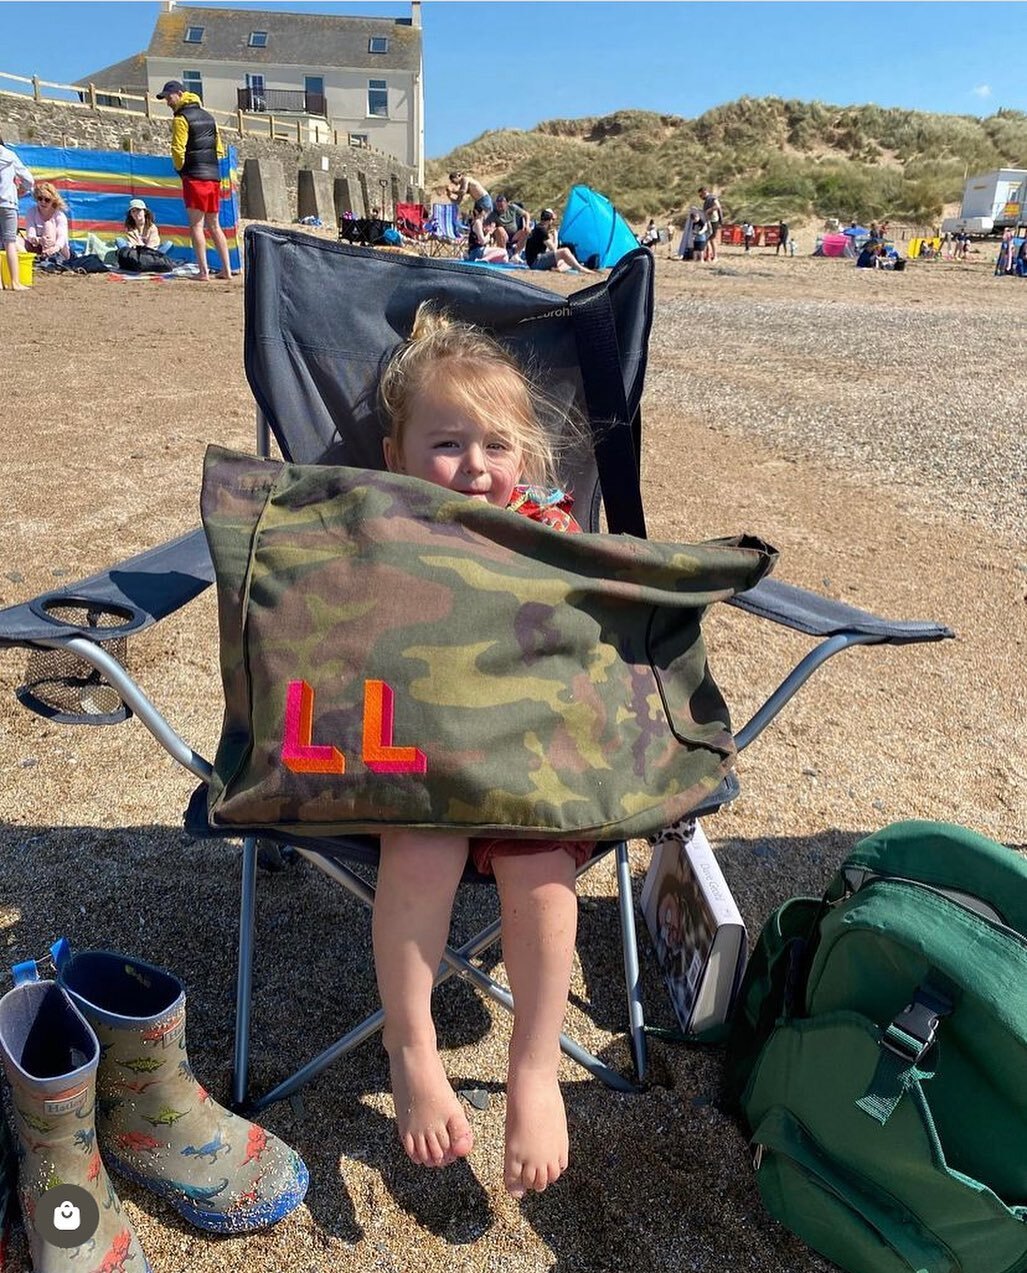 Beach day from last Spring, can&rsquo;t wait to get back by the sea this year 🌊 #personalisedbag #camojumbobag #uniquegiftideas